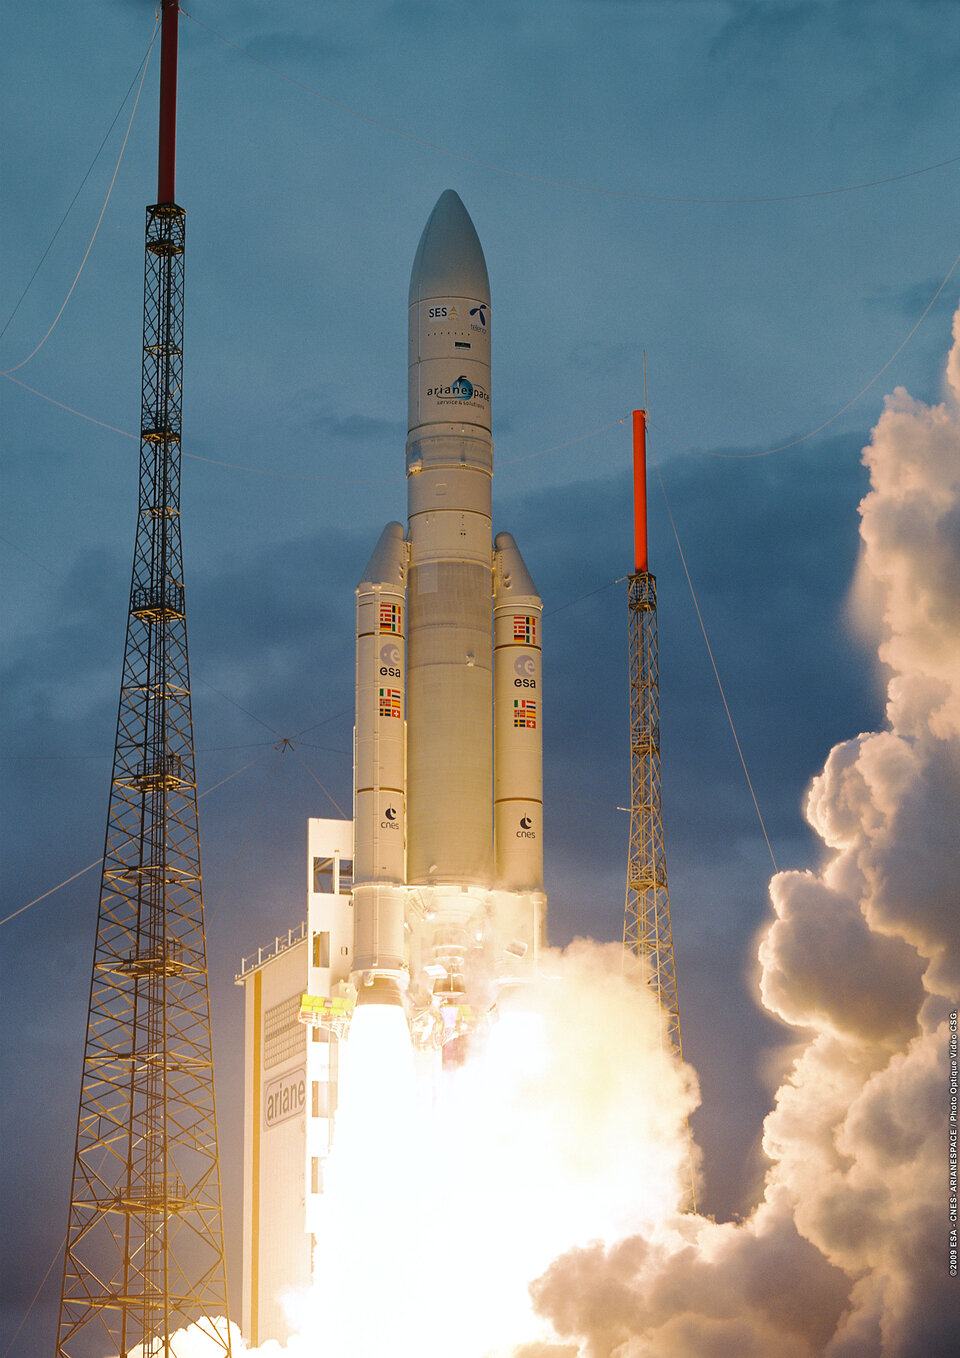 An example of a rocket is Ariane,  the European satellite launcher.